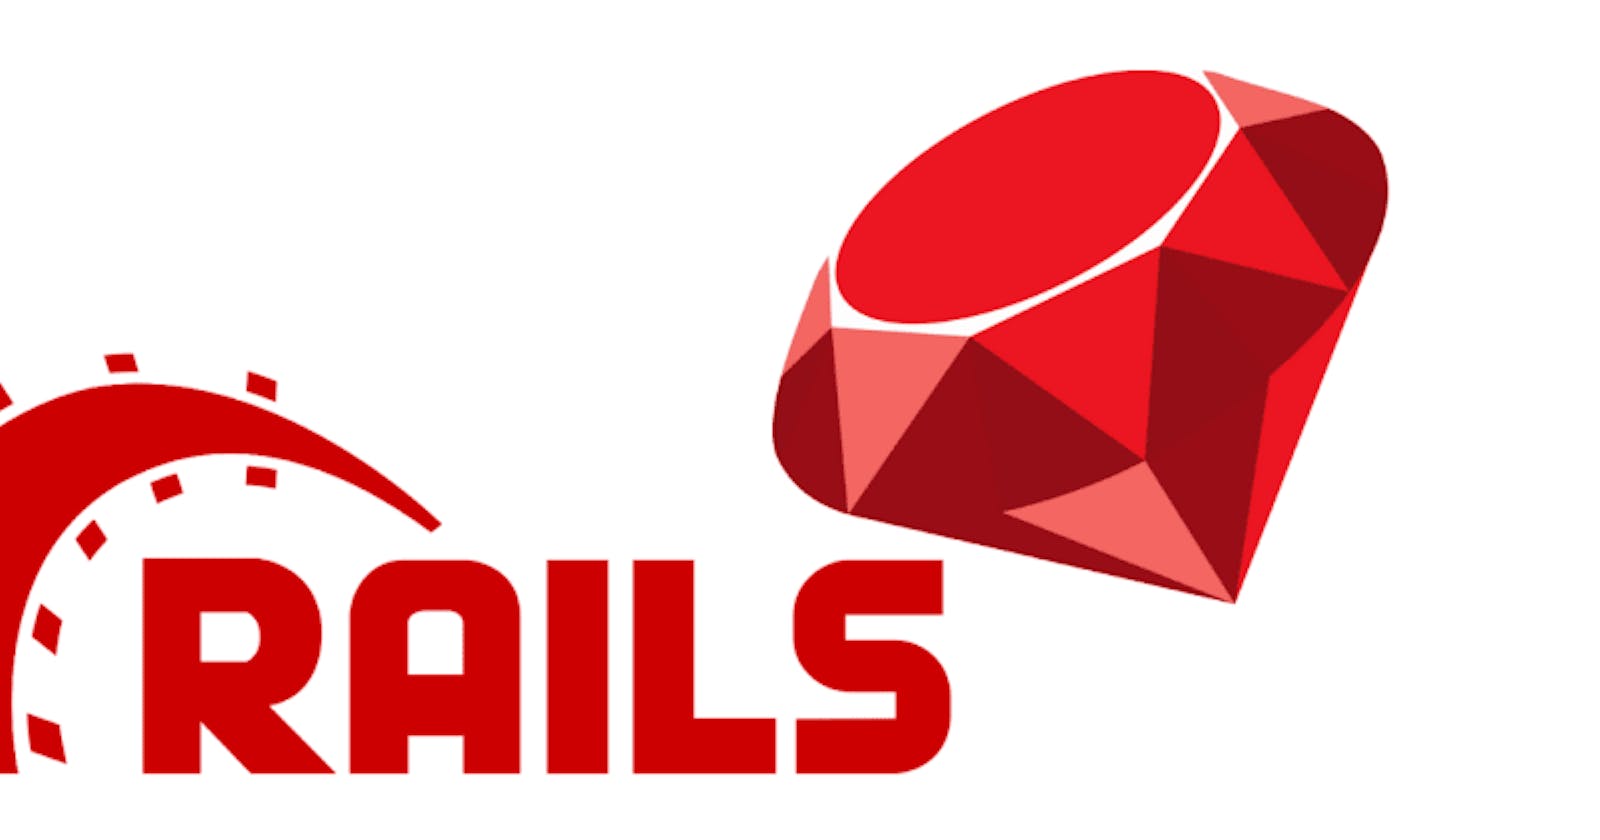 Top 5 Ruby on Rails gems to supercharge your project